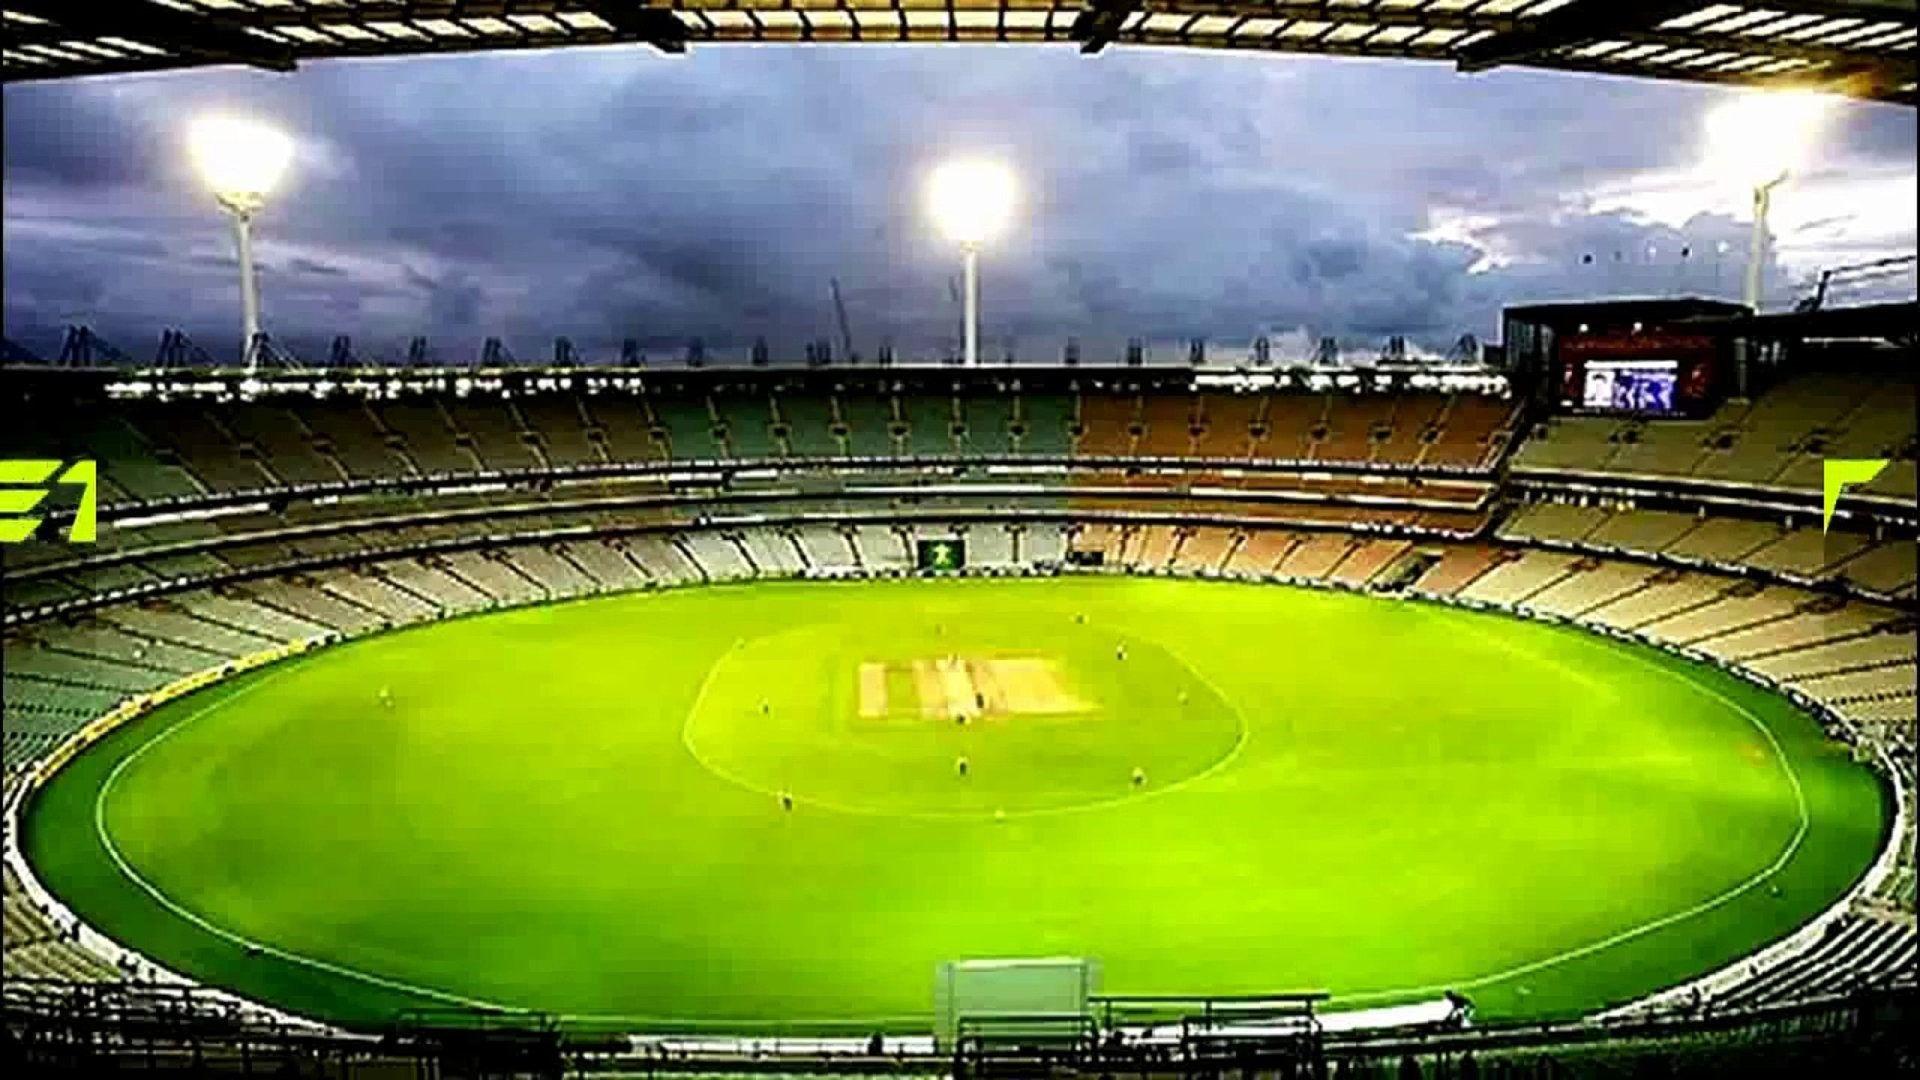 Cricket Stadium Background Hd Images | Images and Photos finder